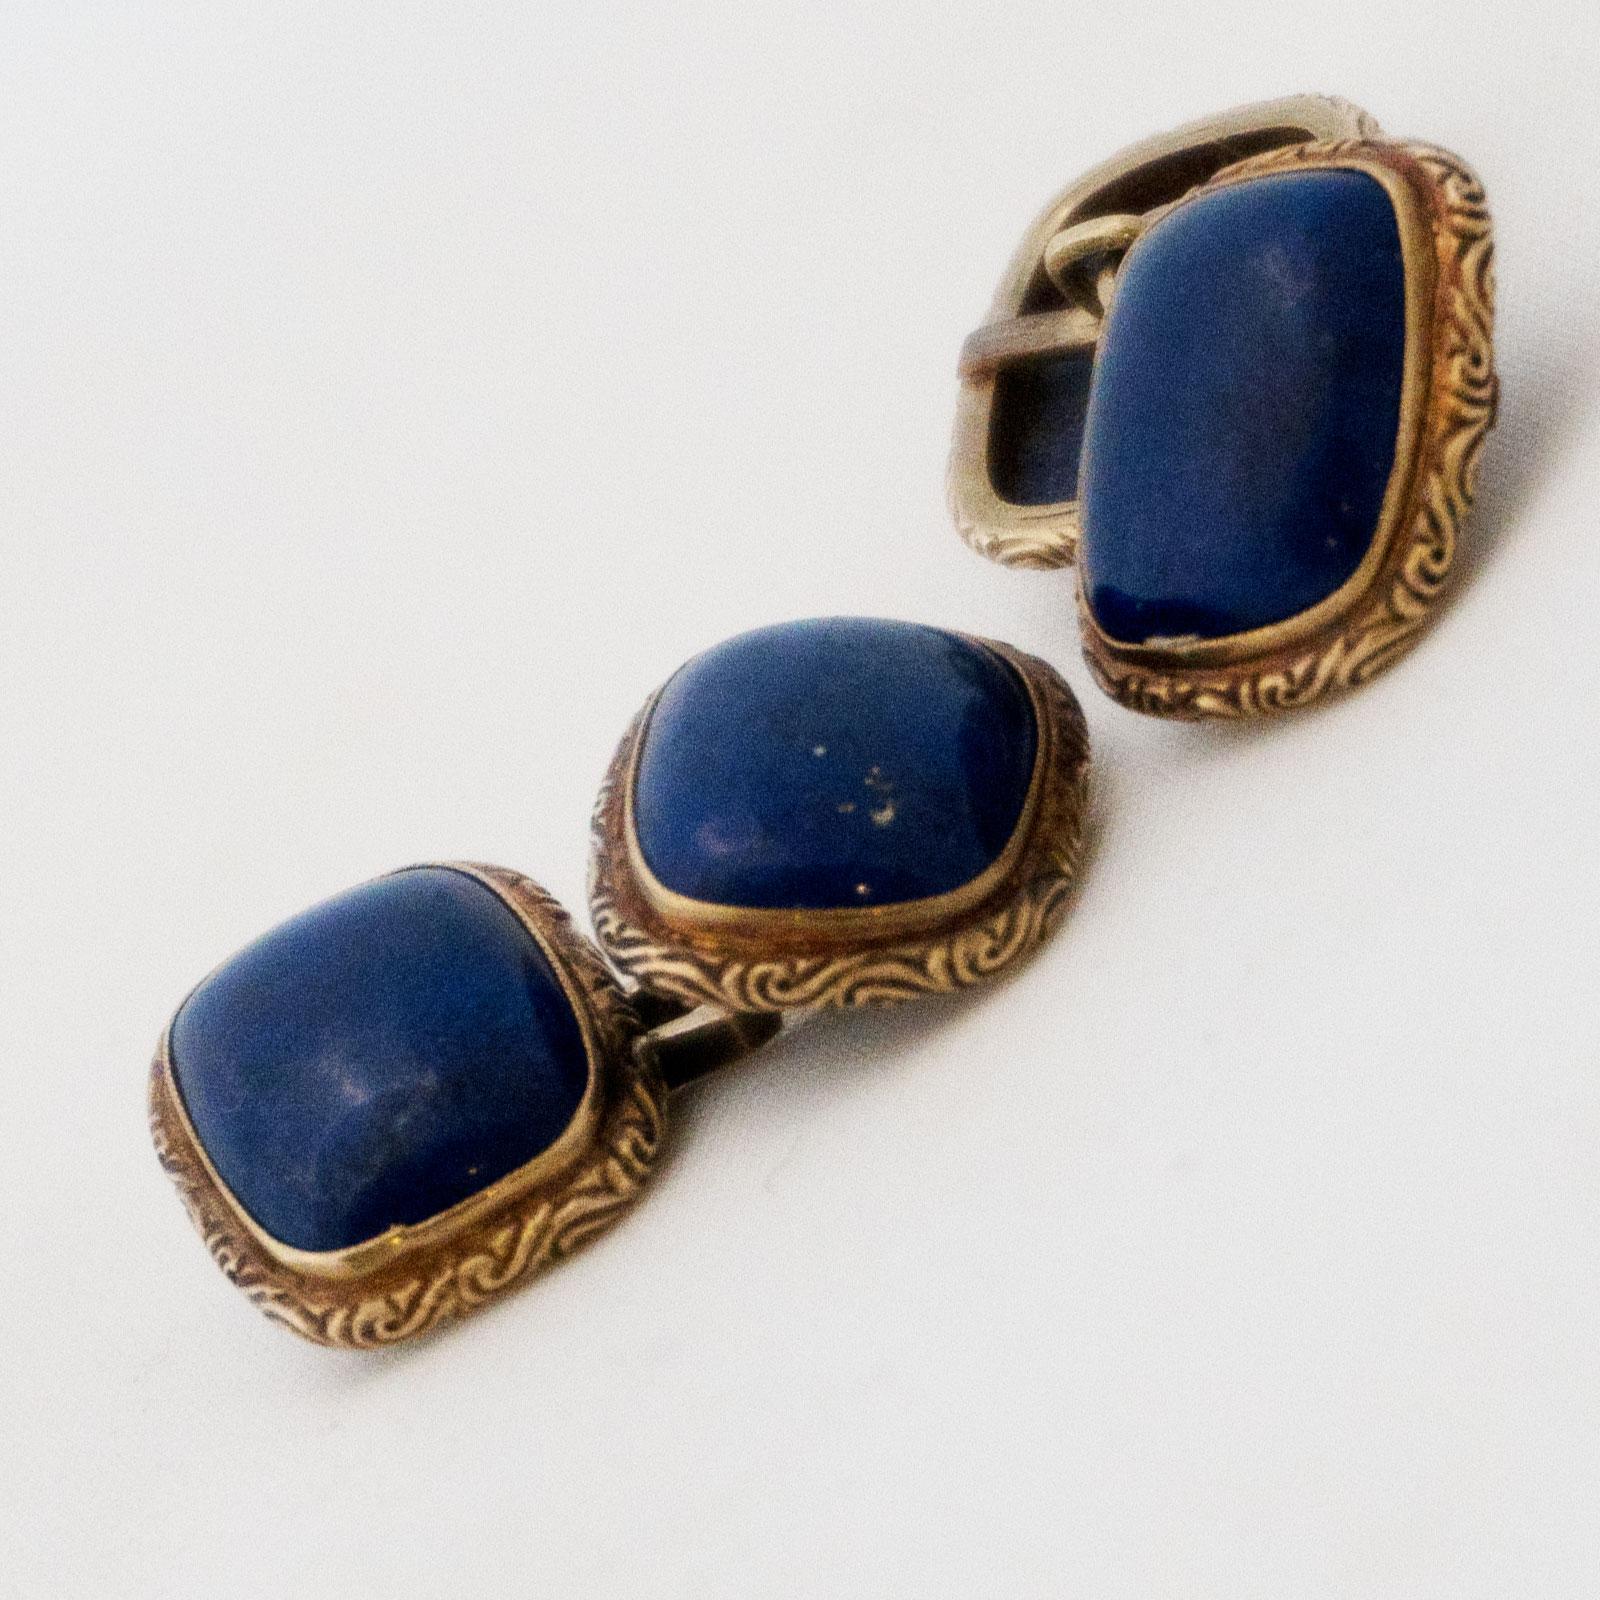 
Golden cufflinks with lapis lazuli
Four cabochon-cut lapis lazuli gemstones framed by a finely chiselled gold 333 setting form a pair of cufflinks. Whether in the office everyday life or also to the evening dress, with these pieces of jewellery the